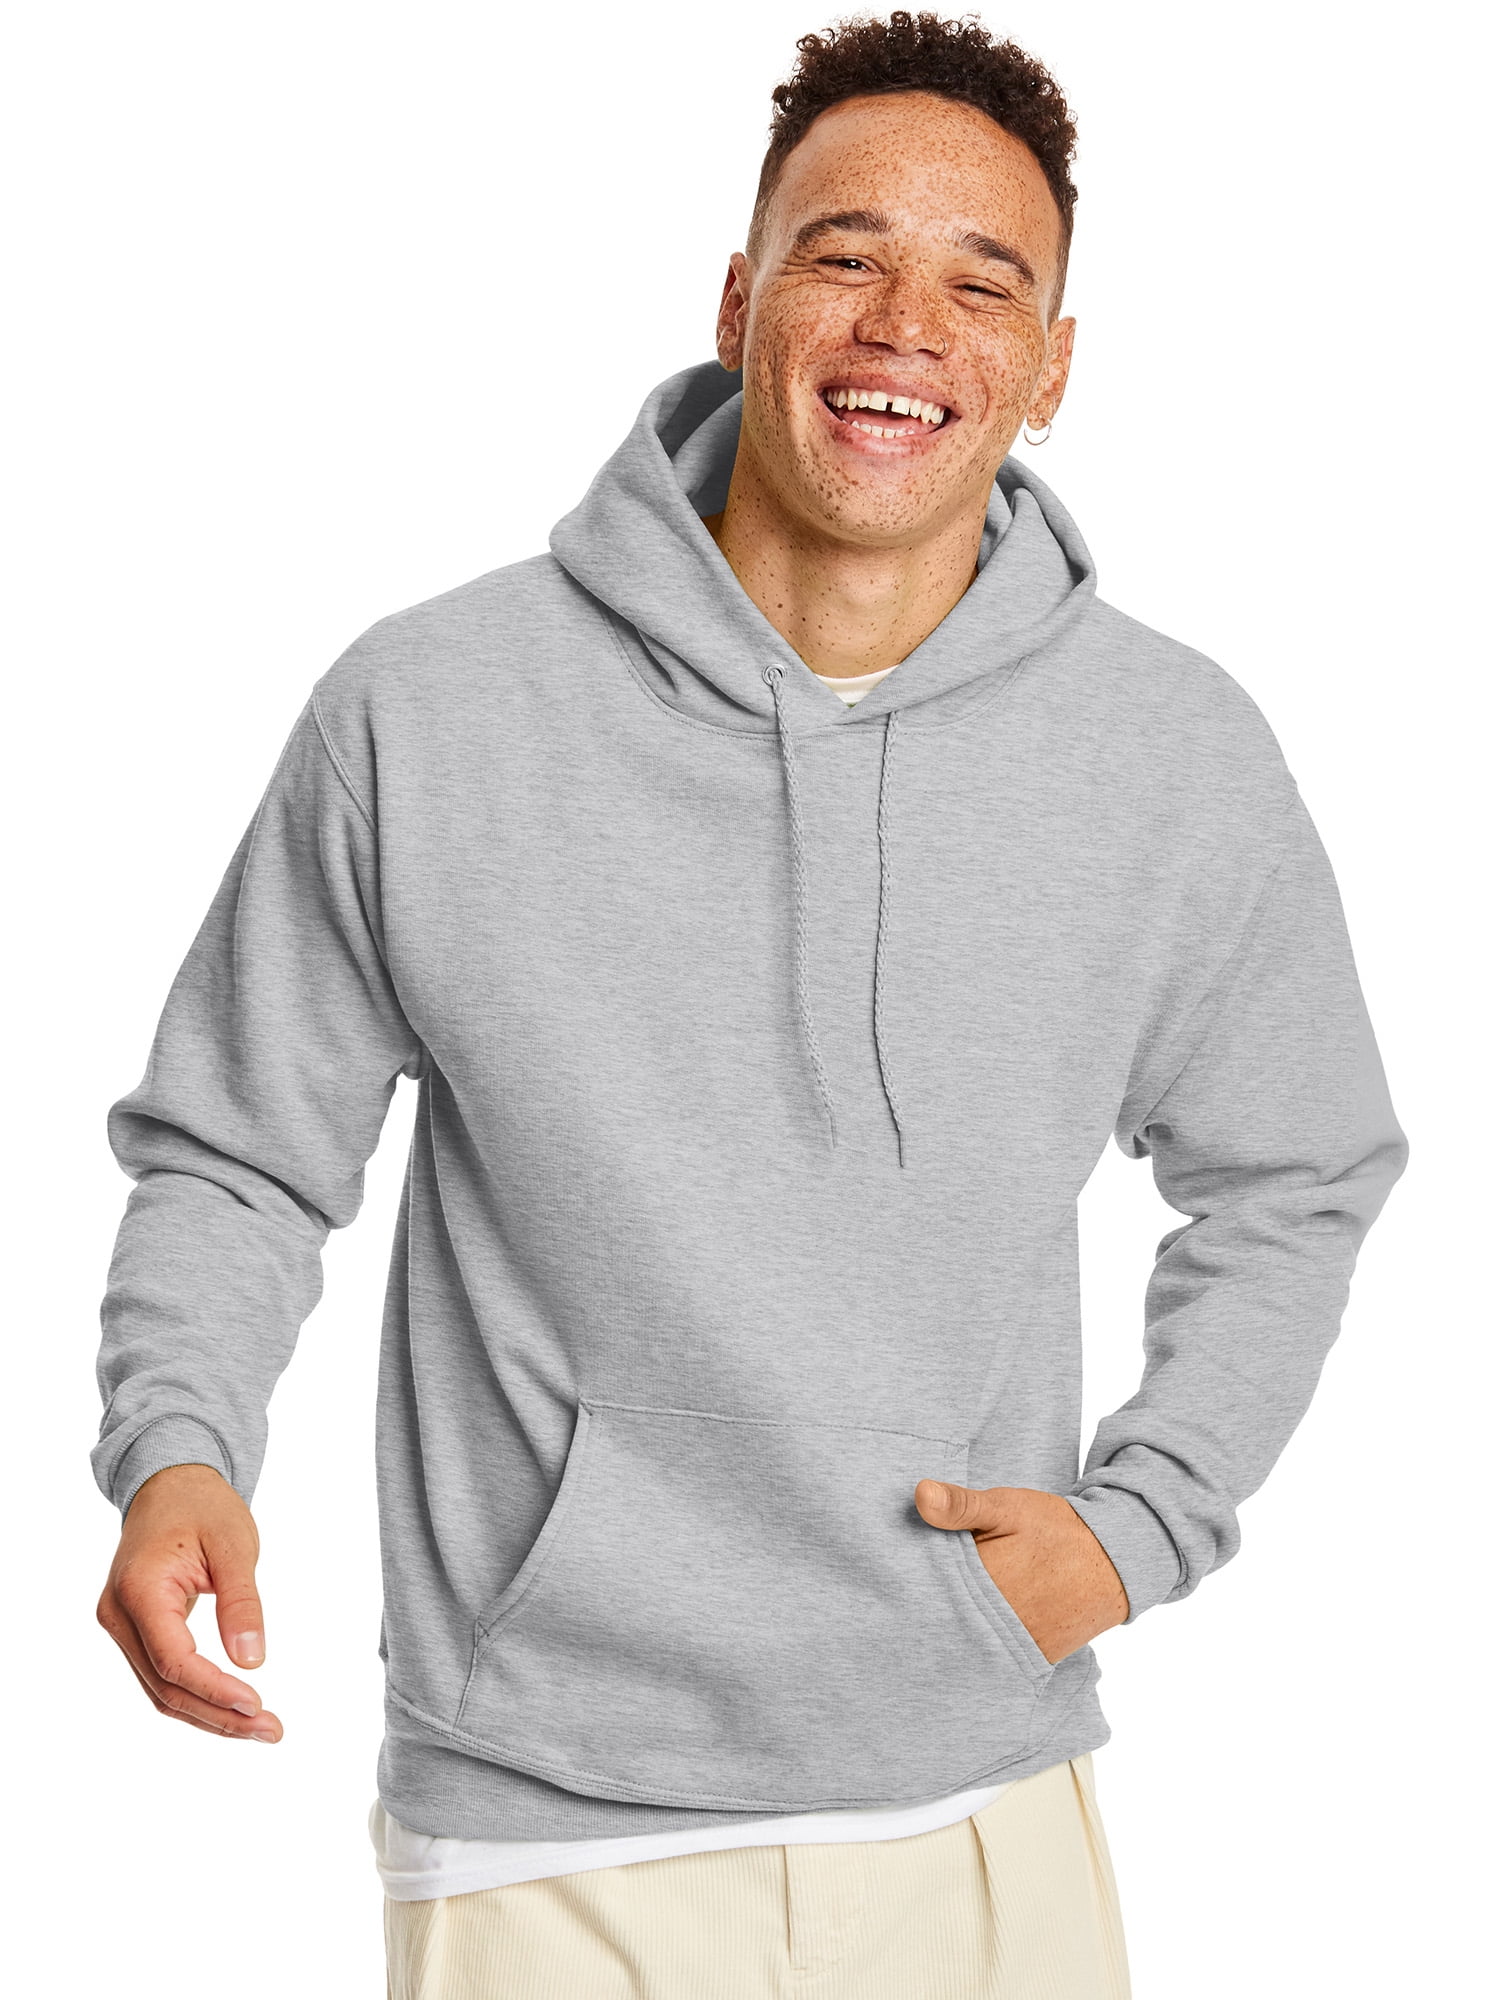 Hanes Long Sleeve Pullover Relaxed Fit Hoodie (Men's or Men's Big & Tall) 1  Pack 